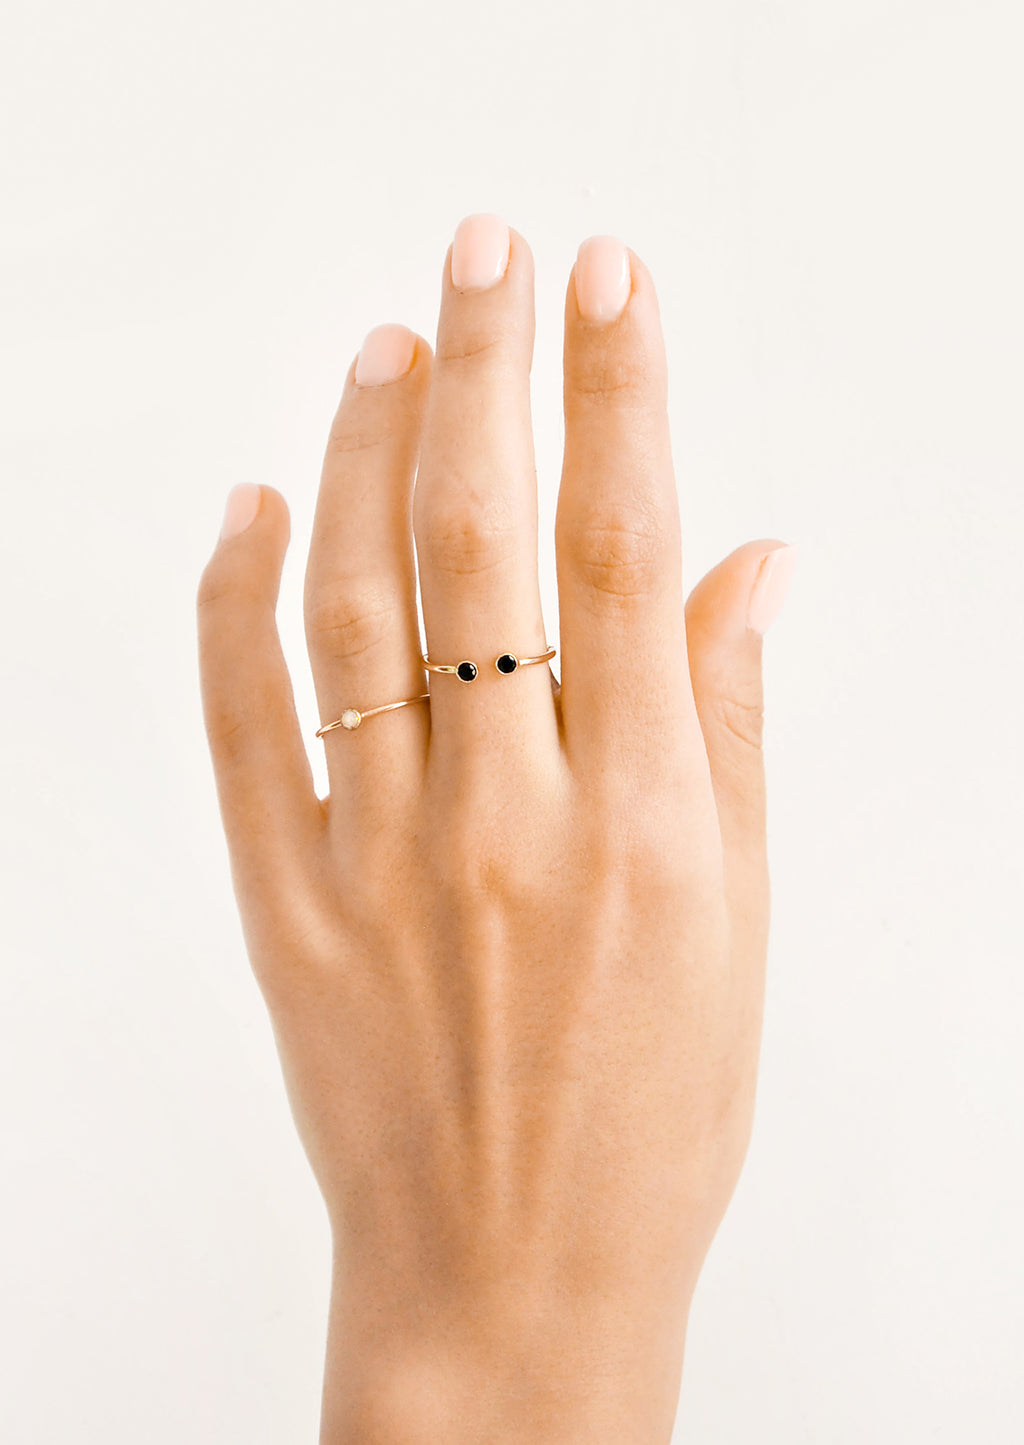 4: Model shot of hand wearing two gold rings with stones.